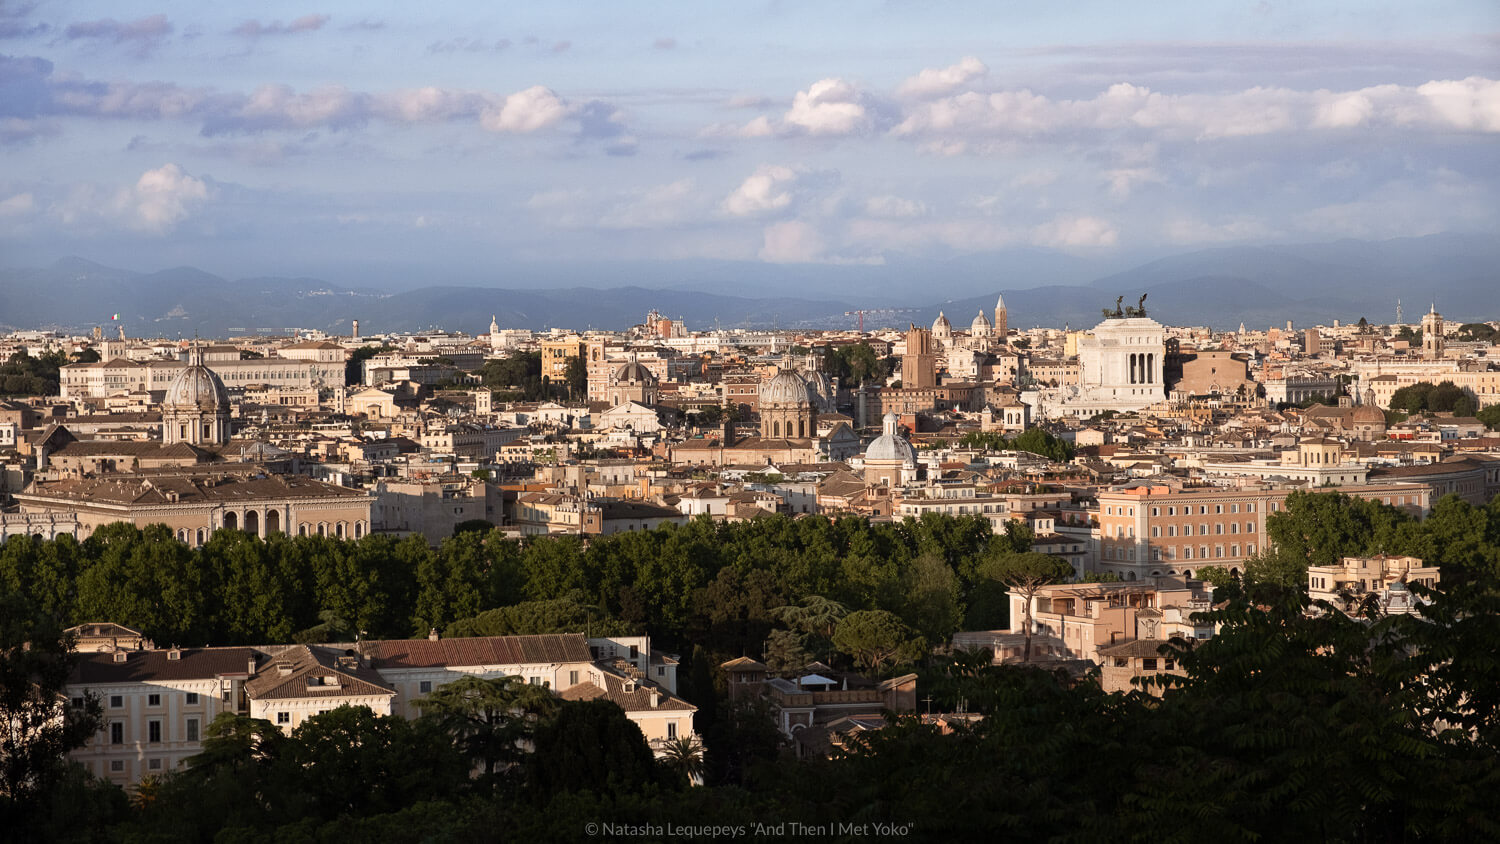 Views from the Janiculum Terrace. Travel photography and guide by © Natasha Lequepeys for "And Then I Met Yoko". #rome #italy #travelblog #travelphotography